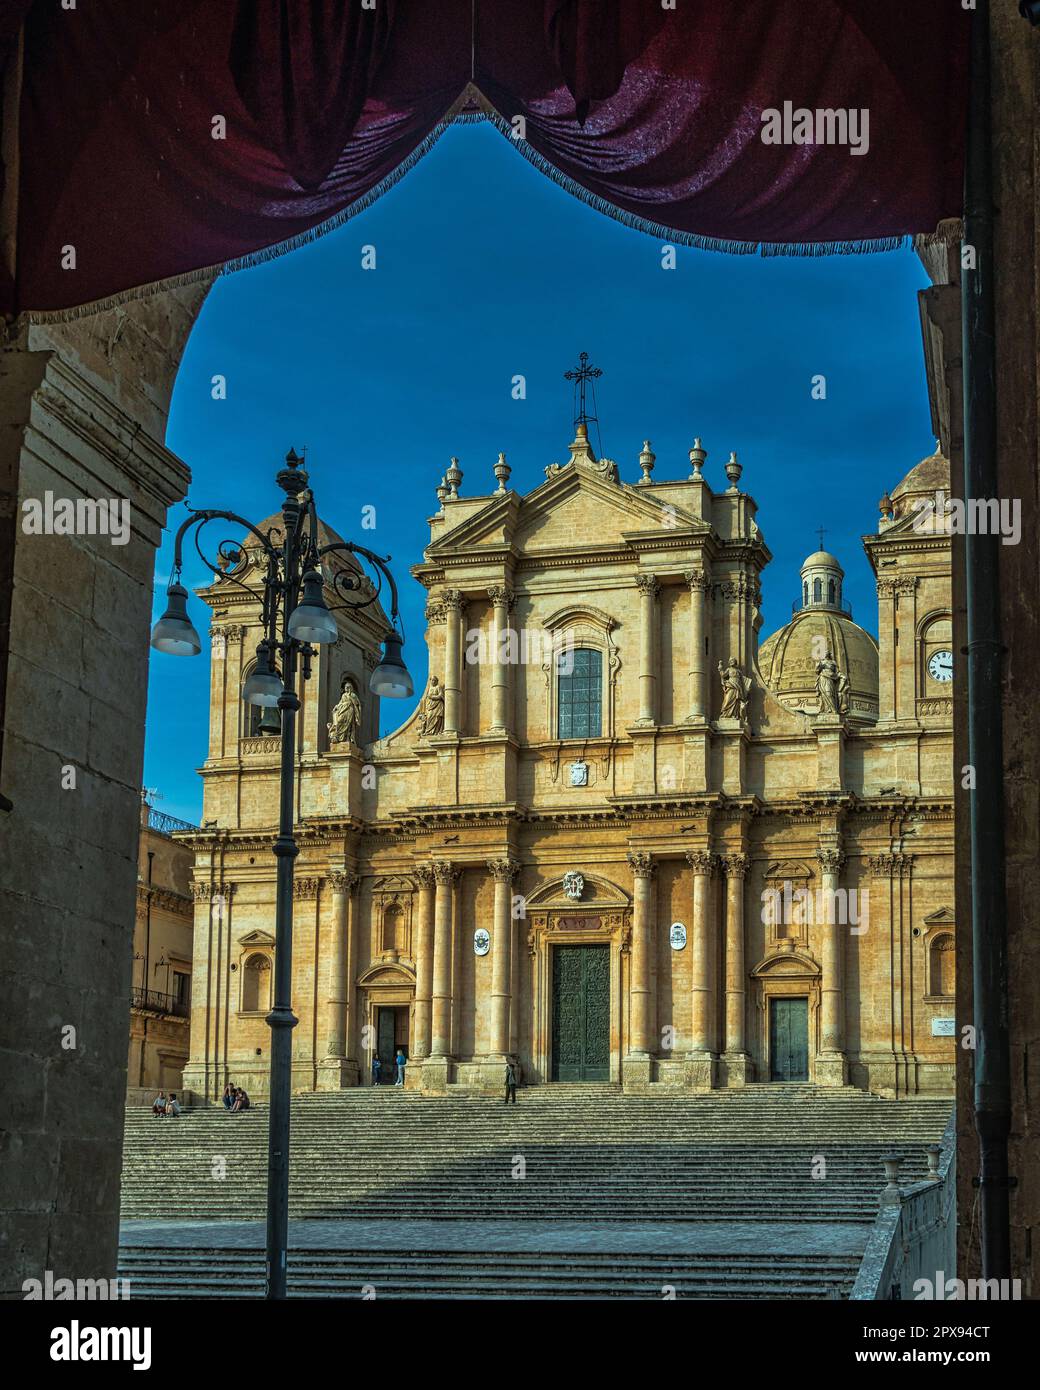 The facade of the Cathedral of San Nicolò, restored in the 18th century in Sicilian Baroque style with a neoclassical dome. Noto, Sicily Stock Photo